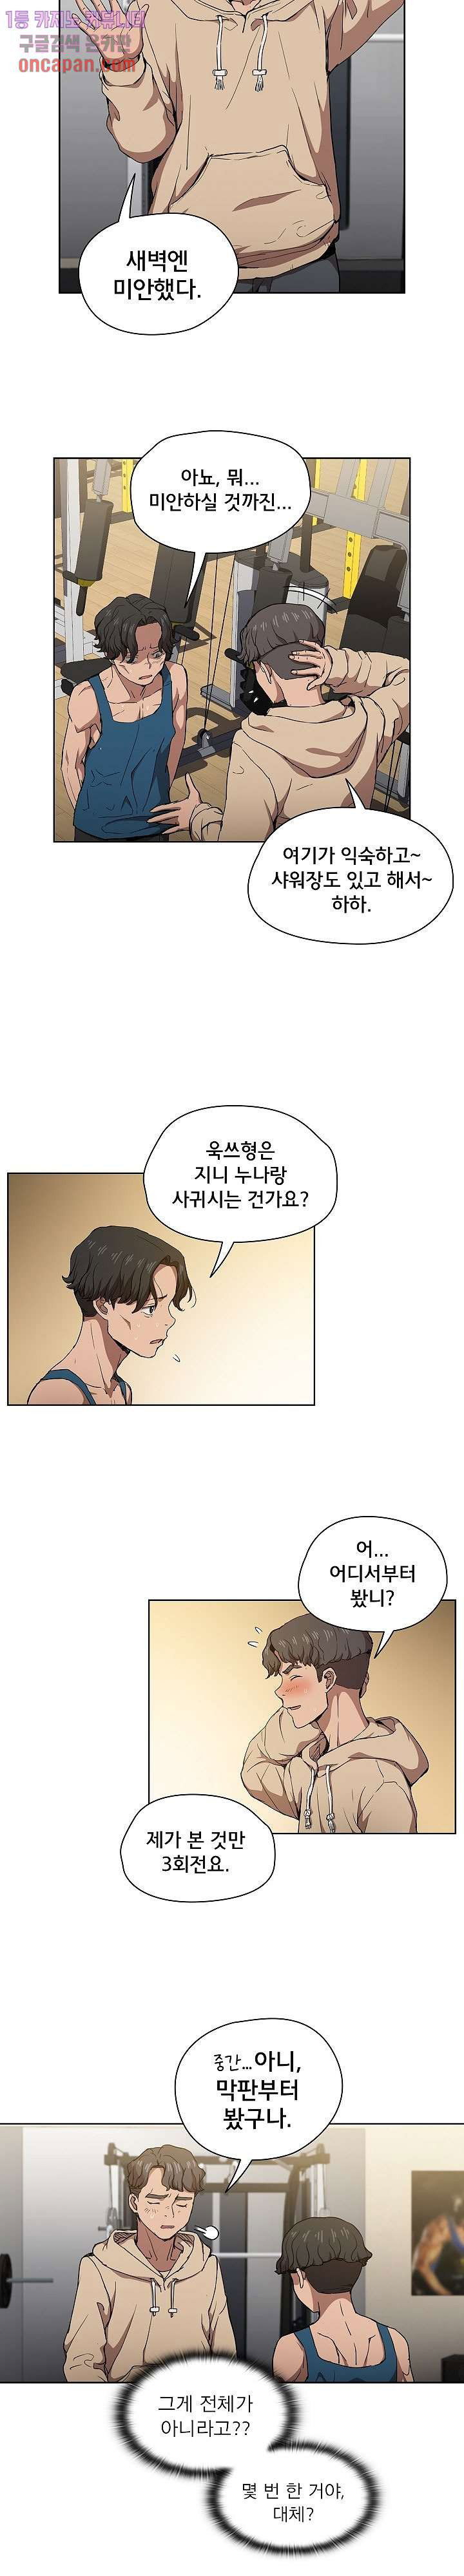 how-about-getting-lost-raw-chap-28-2